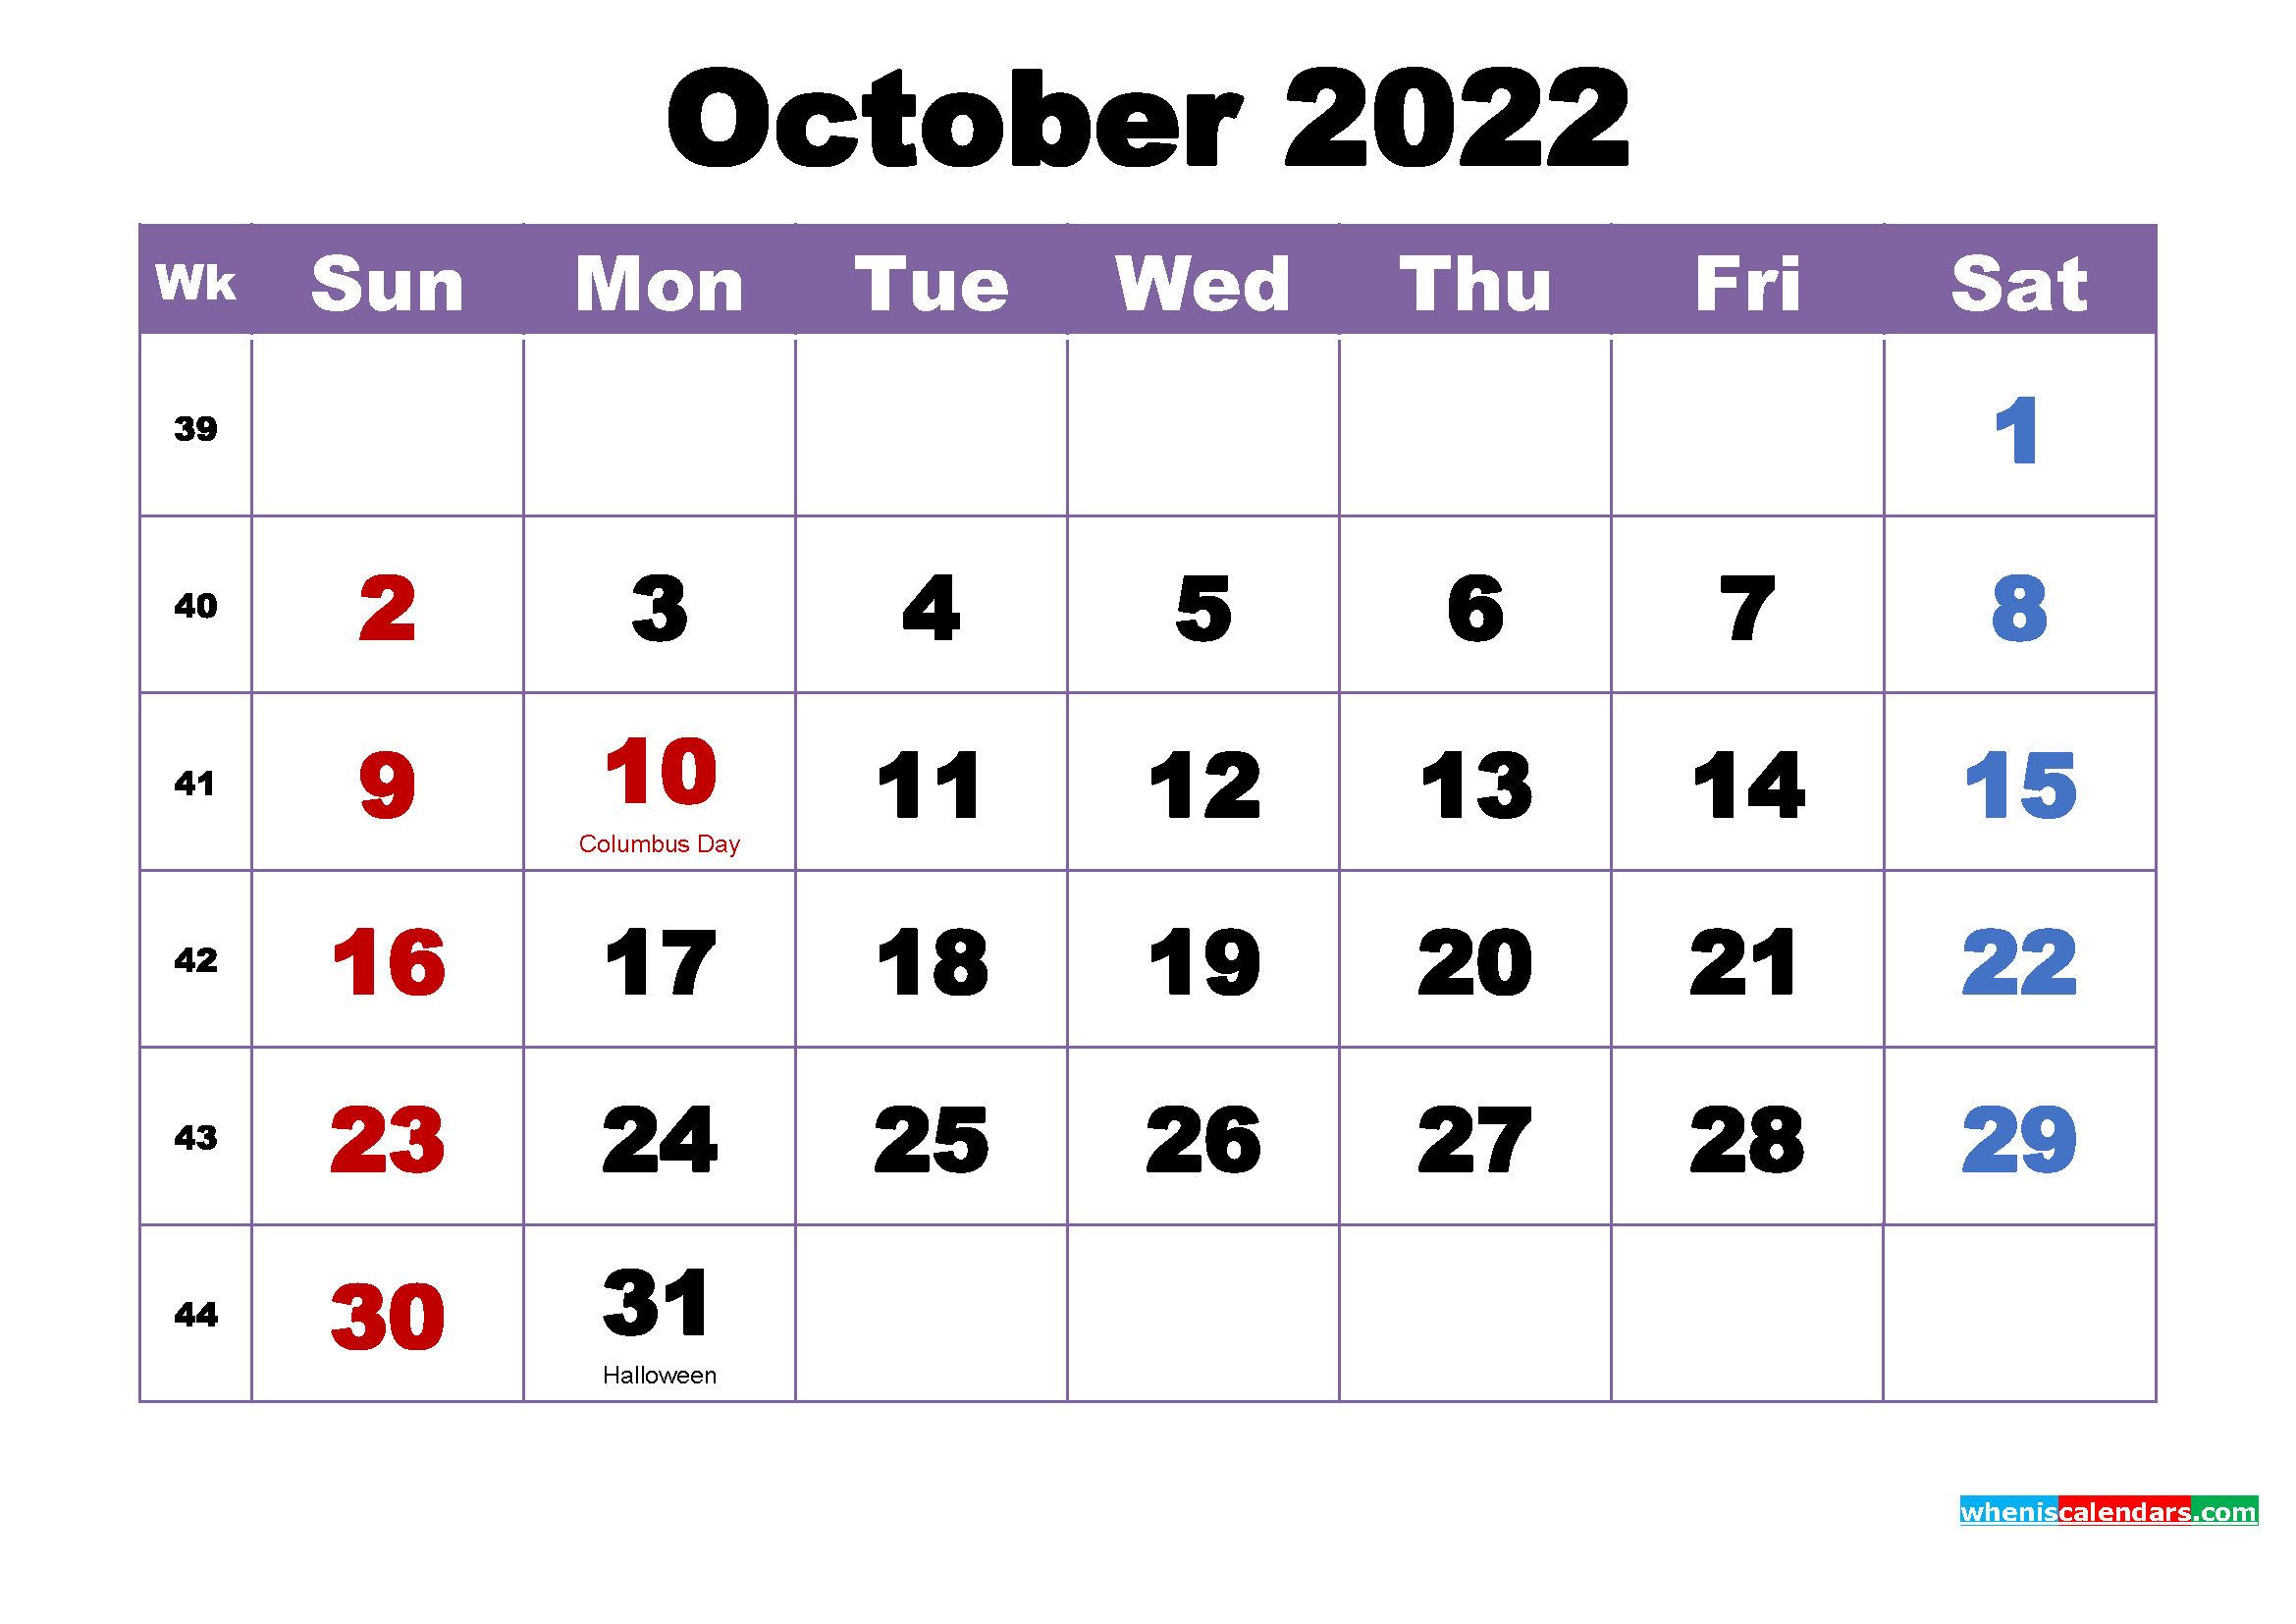 October 2022 Monthly Calendar Free October 2022 Calendar With Holidays Printable